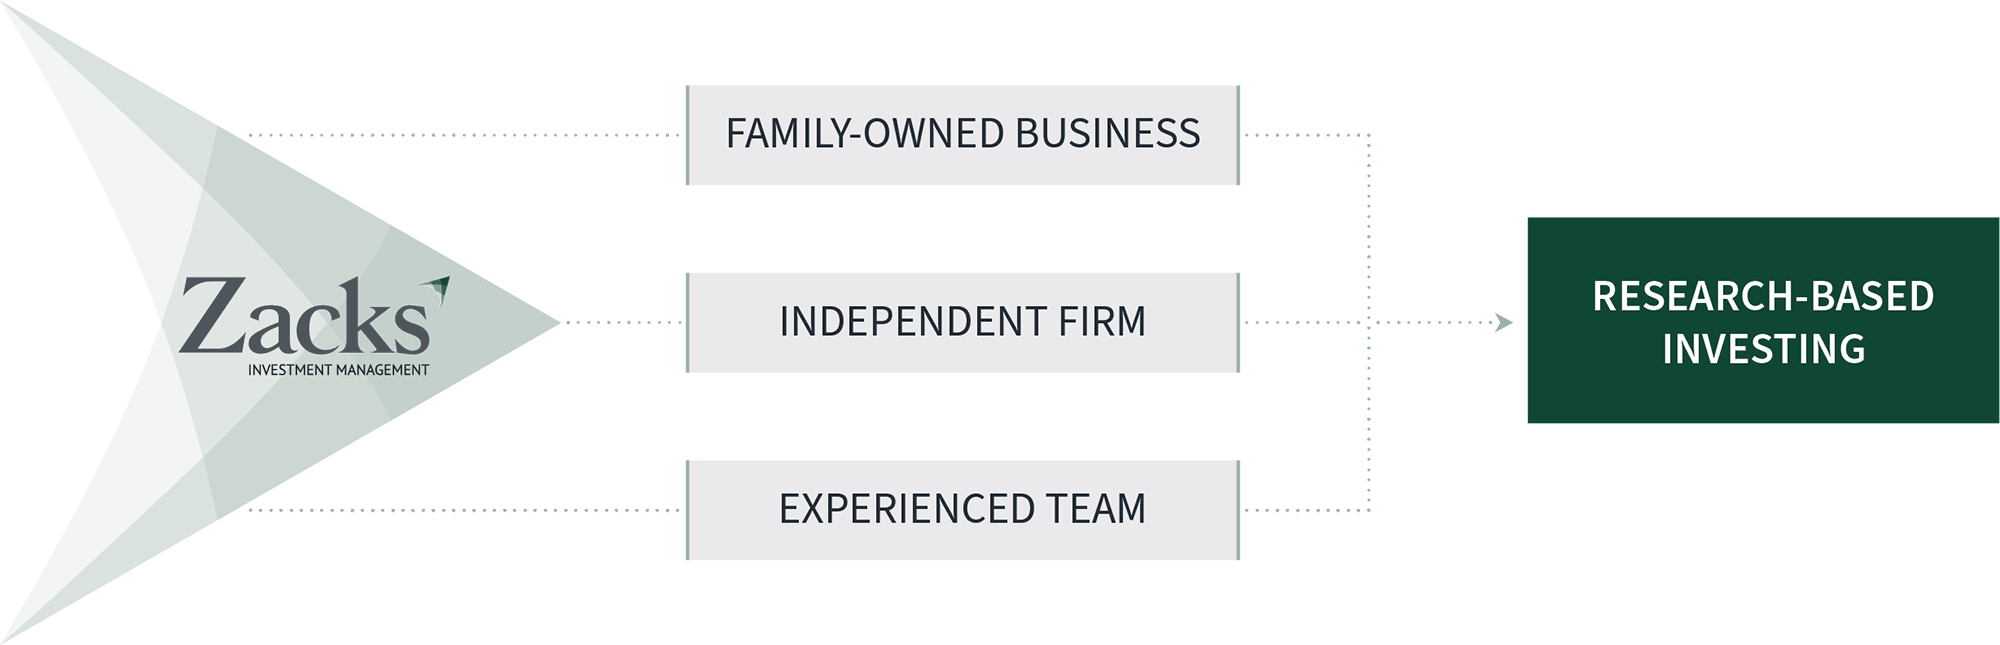 Diagram showing Zacks as a family-owned, independent firmwith an experienced team generating research-based investing.